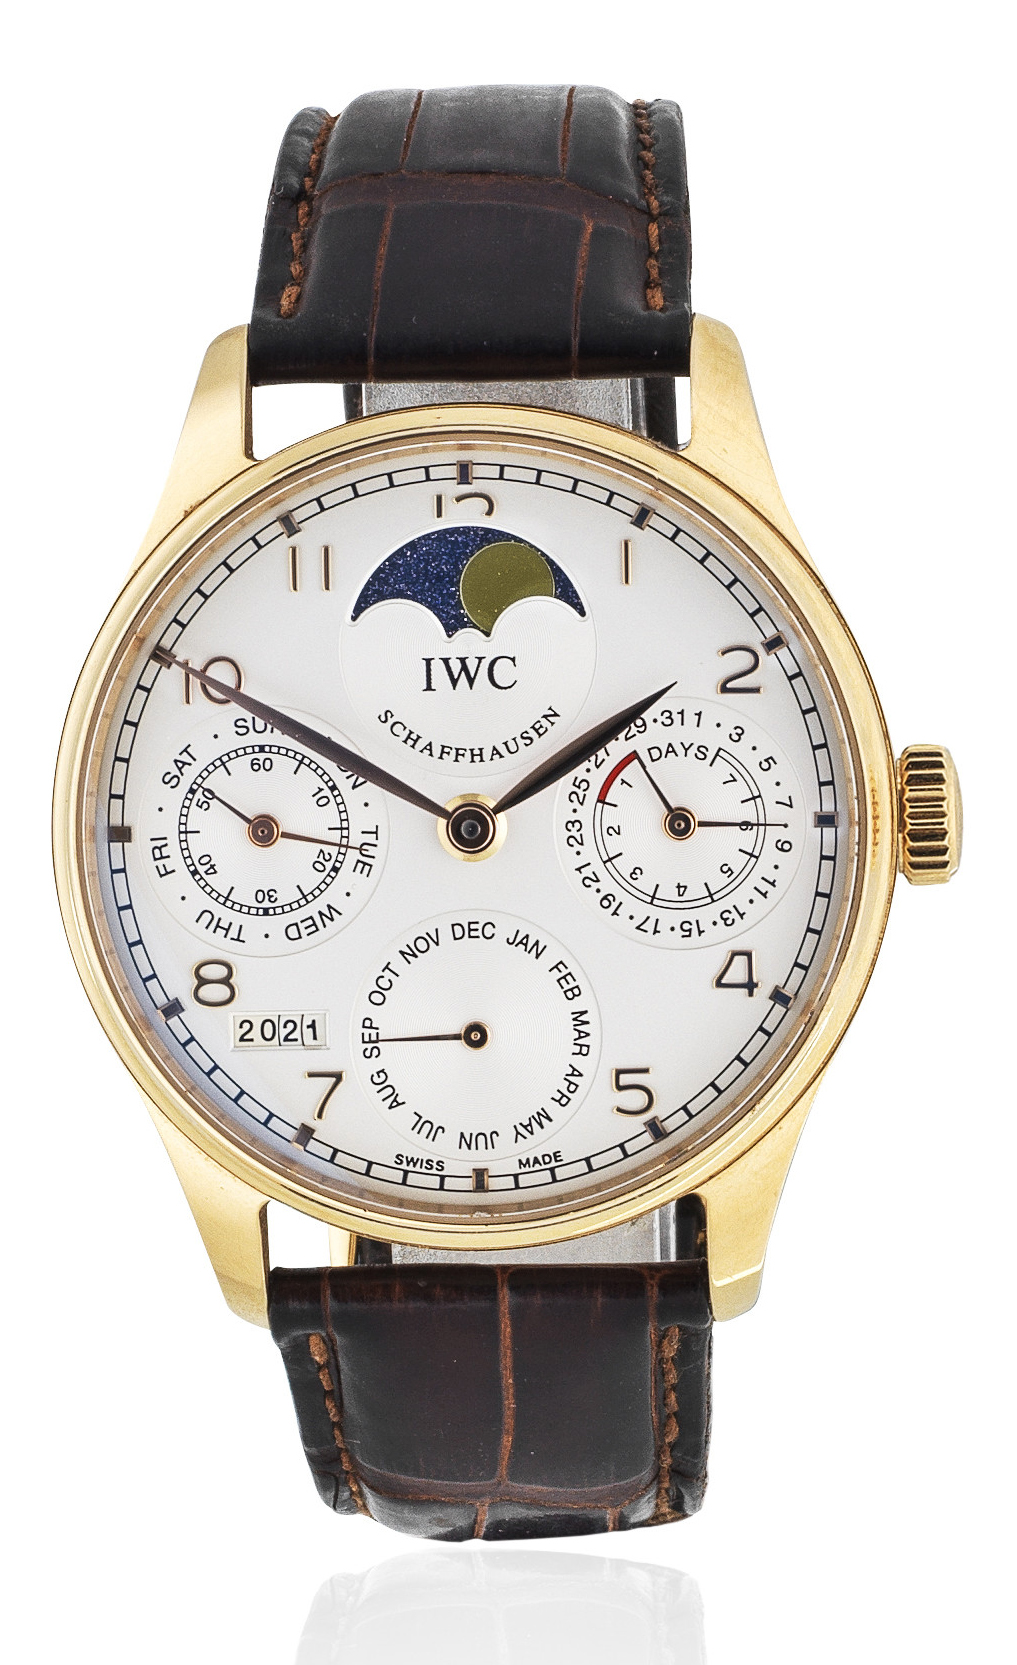 183 iwc. An 18k rose gold automatic perpetual calendar wristwatch with moon phase and 7 day power reserve portugese perpetual calendar ref 5022 recent